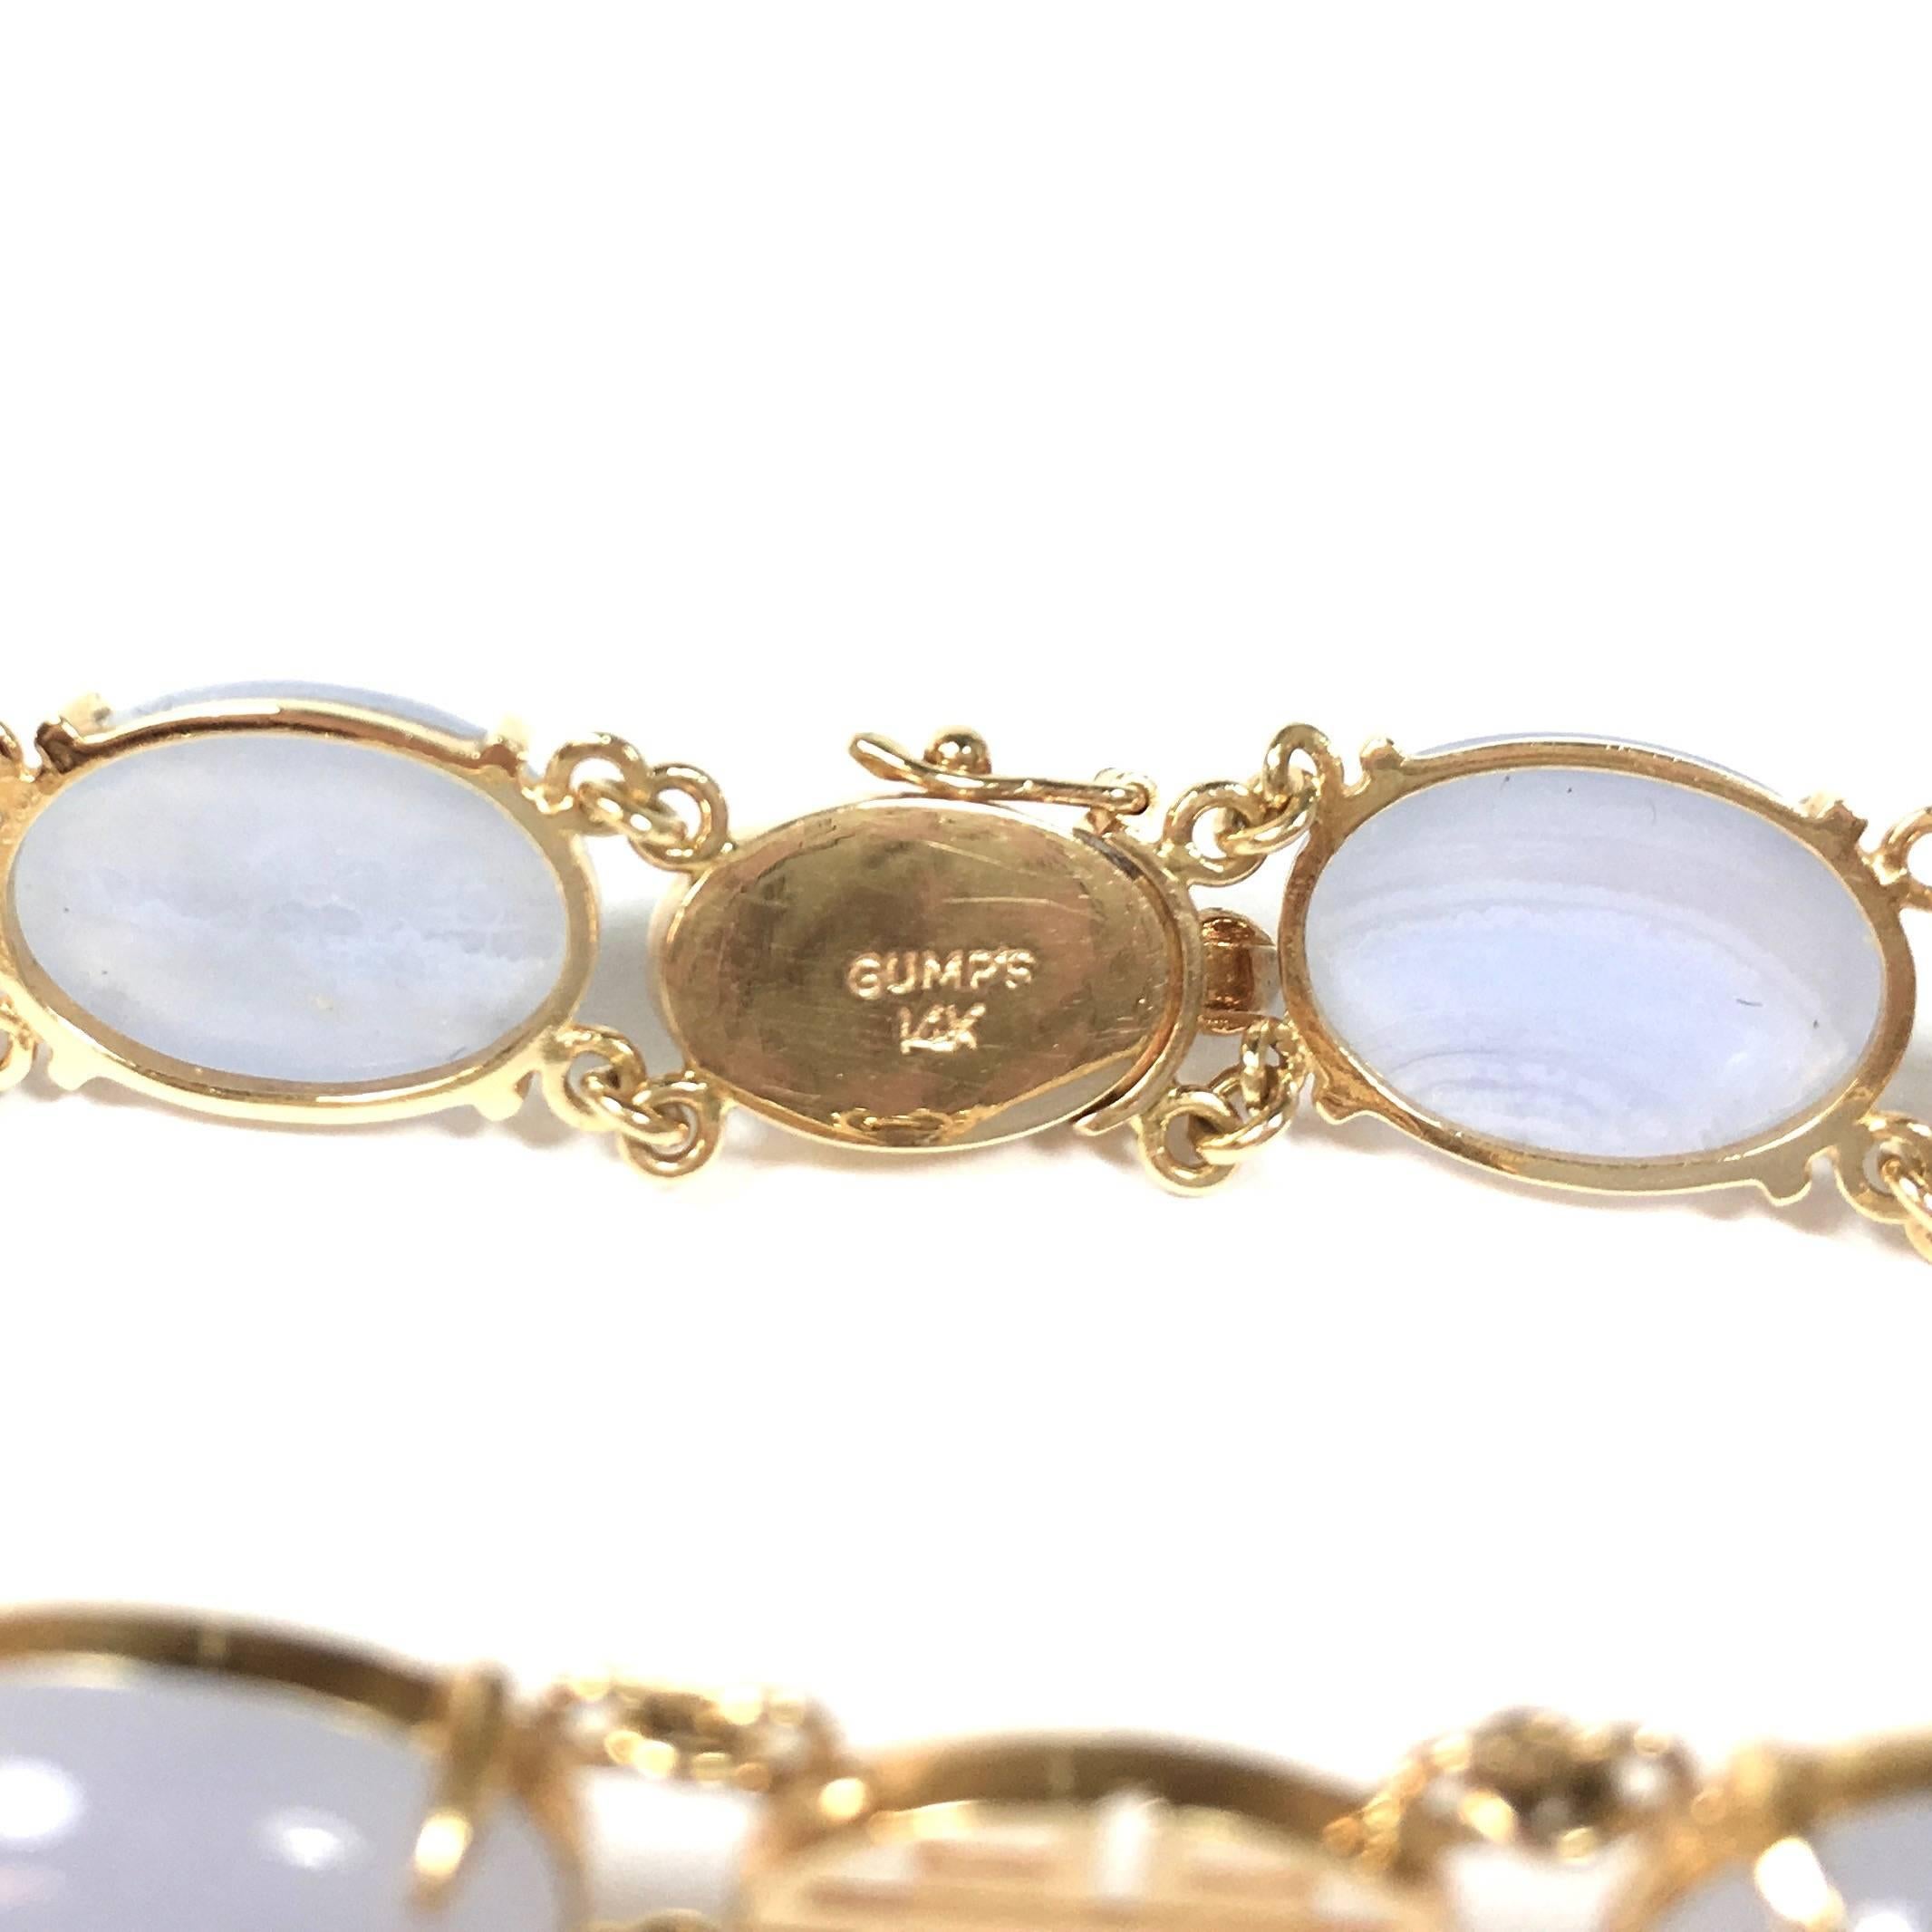 14K yellow gold Gump's San Francisco 6 stone 15x10mm oval cabochon blue lace agate bracelet.
Length: 7 inches
Marked: Gump's 14K
Weight: 15.0 grams